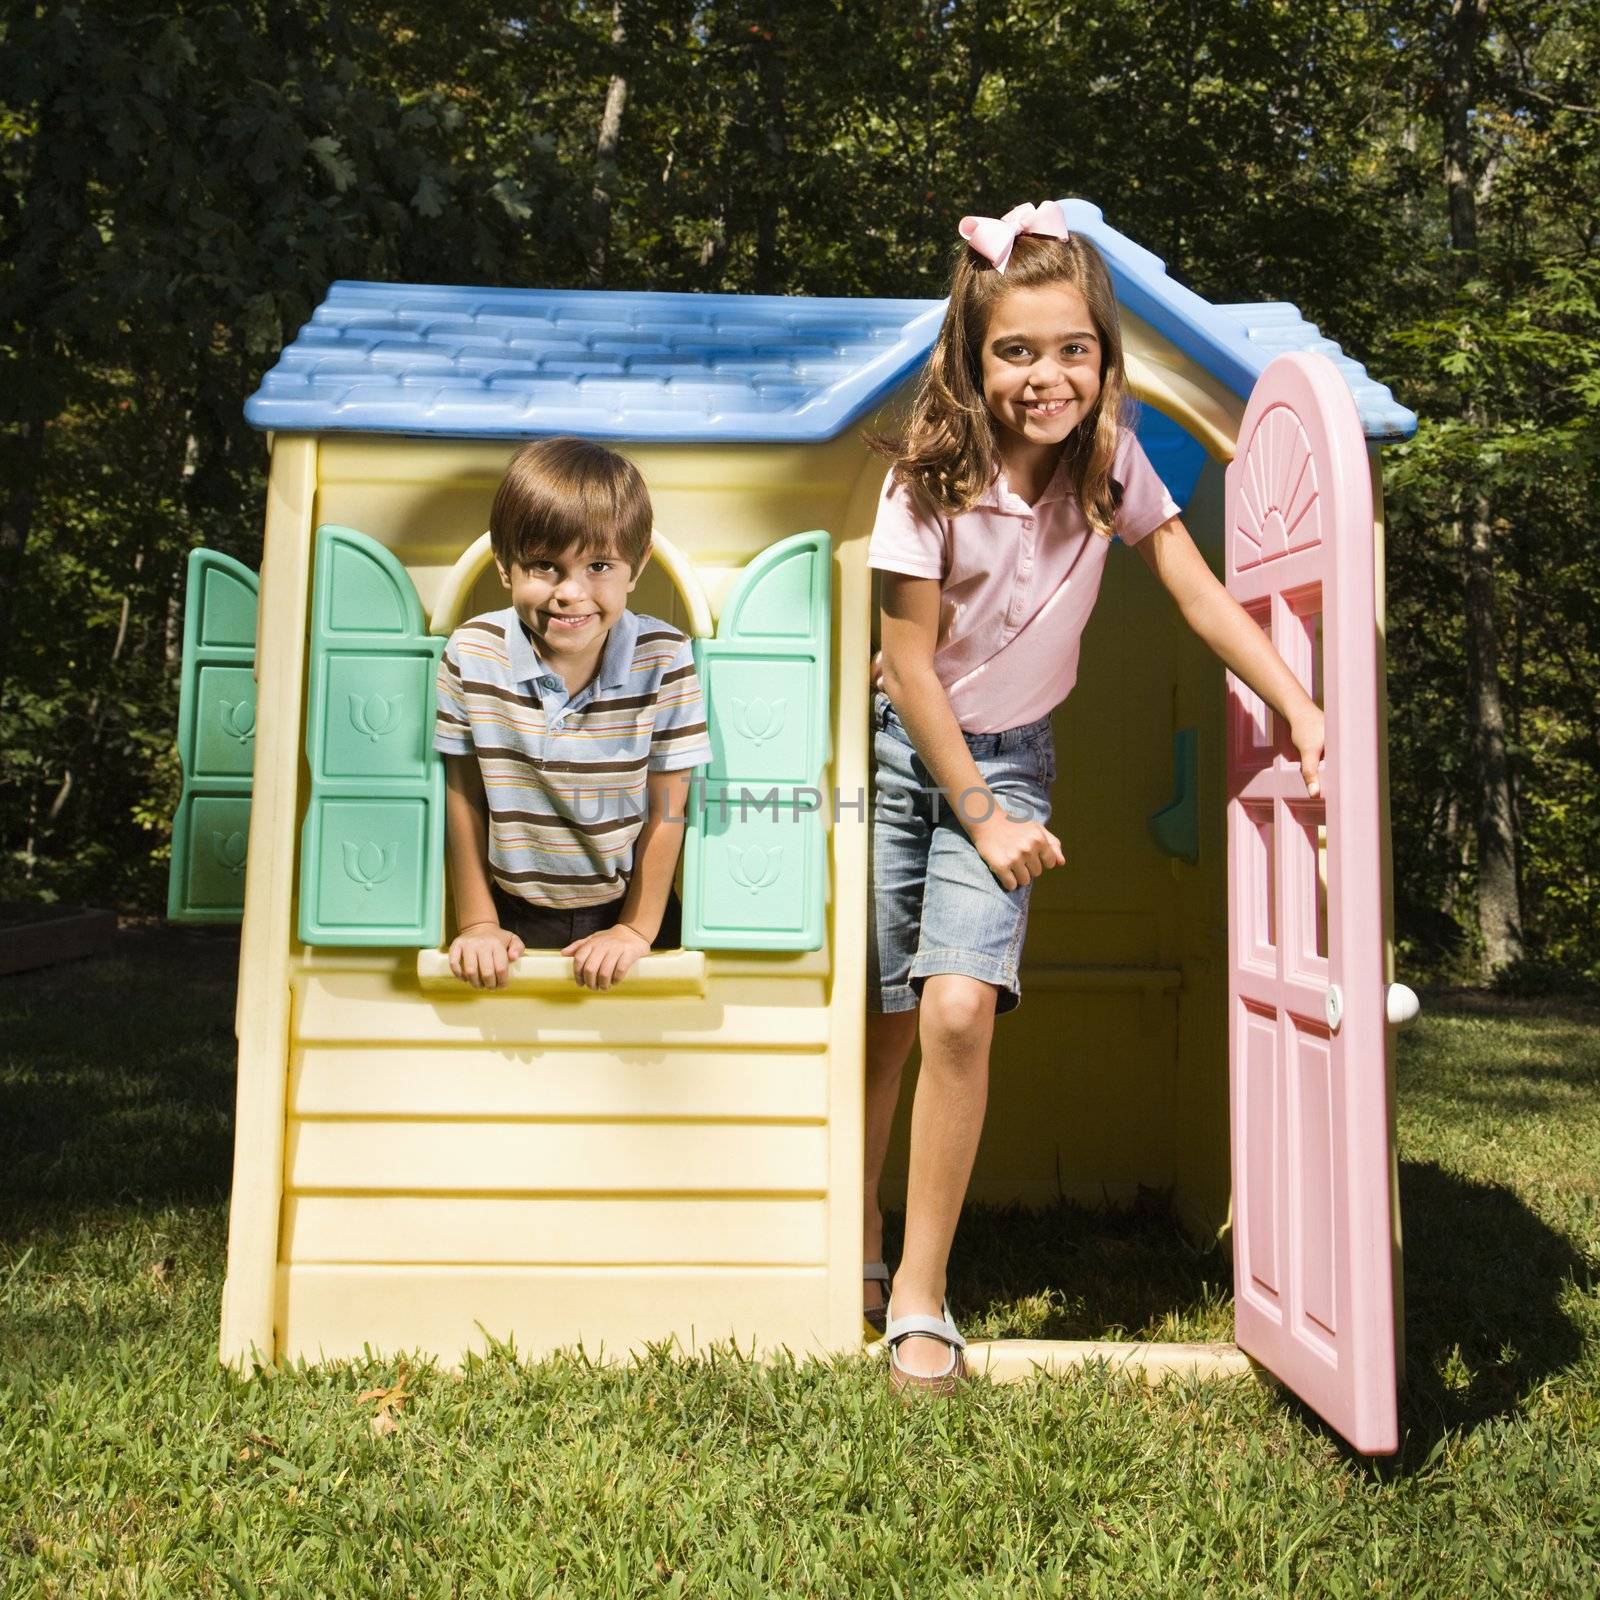 Hispanic boy and girl in outdoor playhouse smiling at viewer.